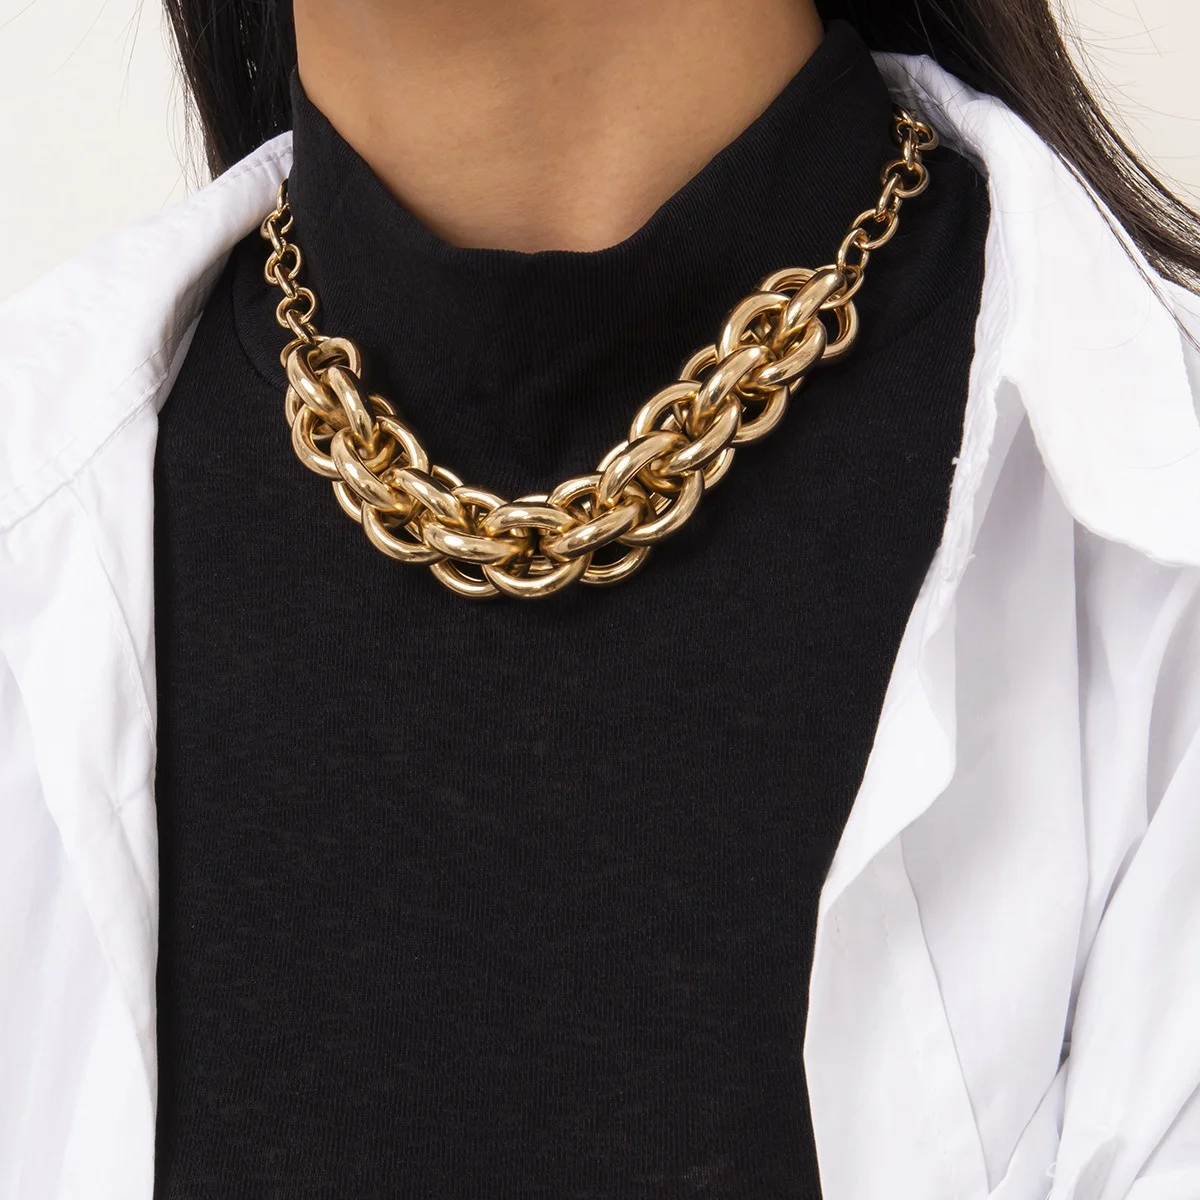 

Hip Hop Curb Cuban Chunky Chain Choker Necklace Exaggerated Gorgeous Heavy Metal Twisted Chain necklace Chains for Women Men, Picture shows